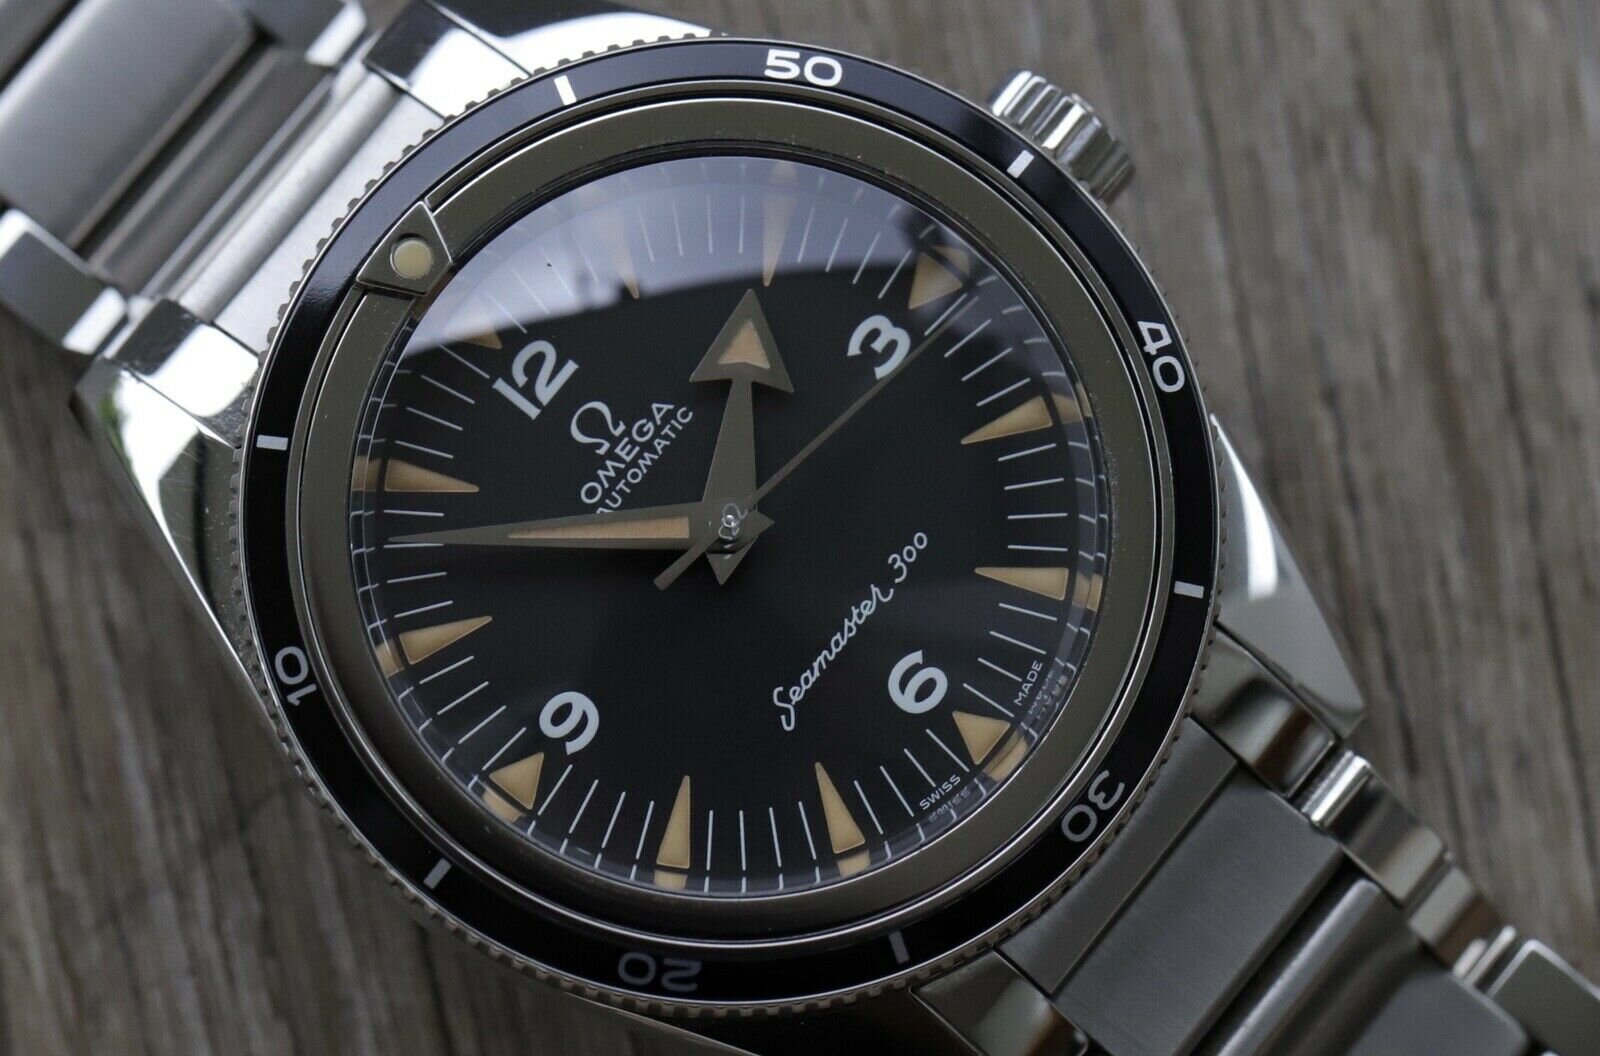 Omega_Seamaster_300_E2_80_98The_1957_Trilogy_E2_80_99_Limited_Edition_234.10.39.20.01.001_-_20_Watch_VAult_01.jpg